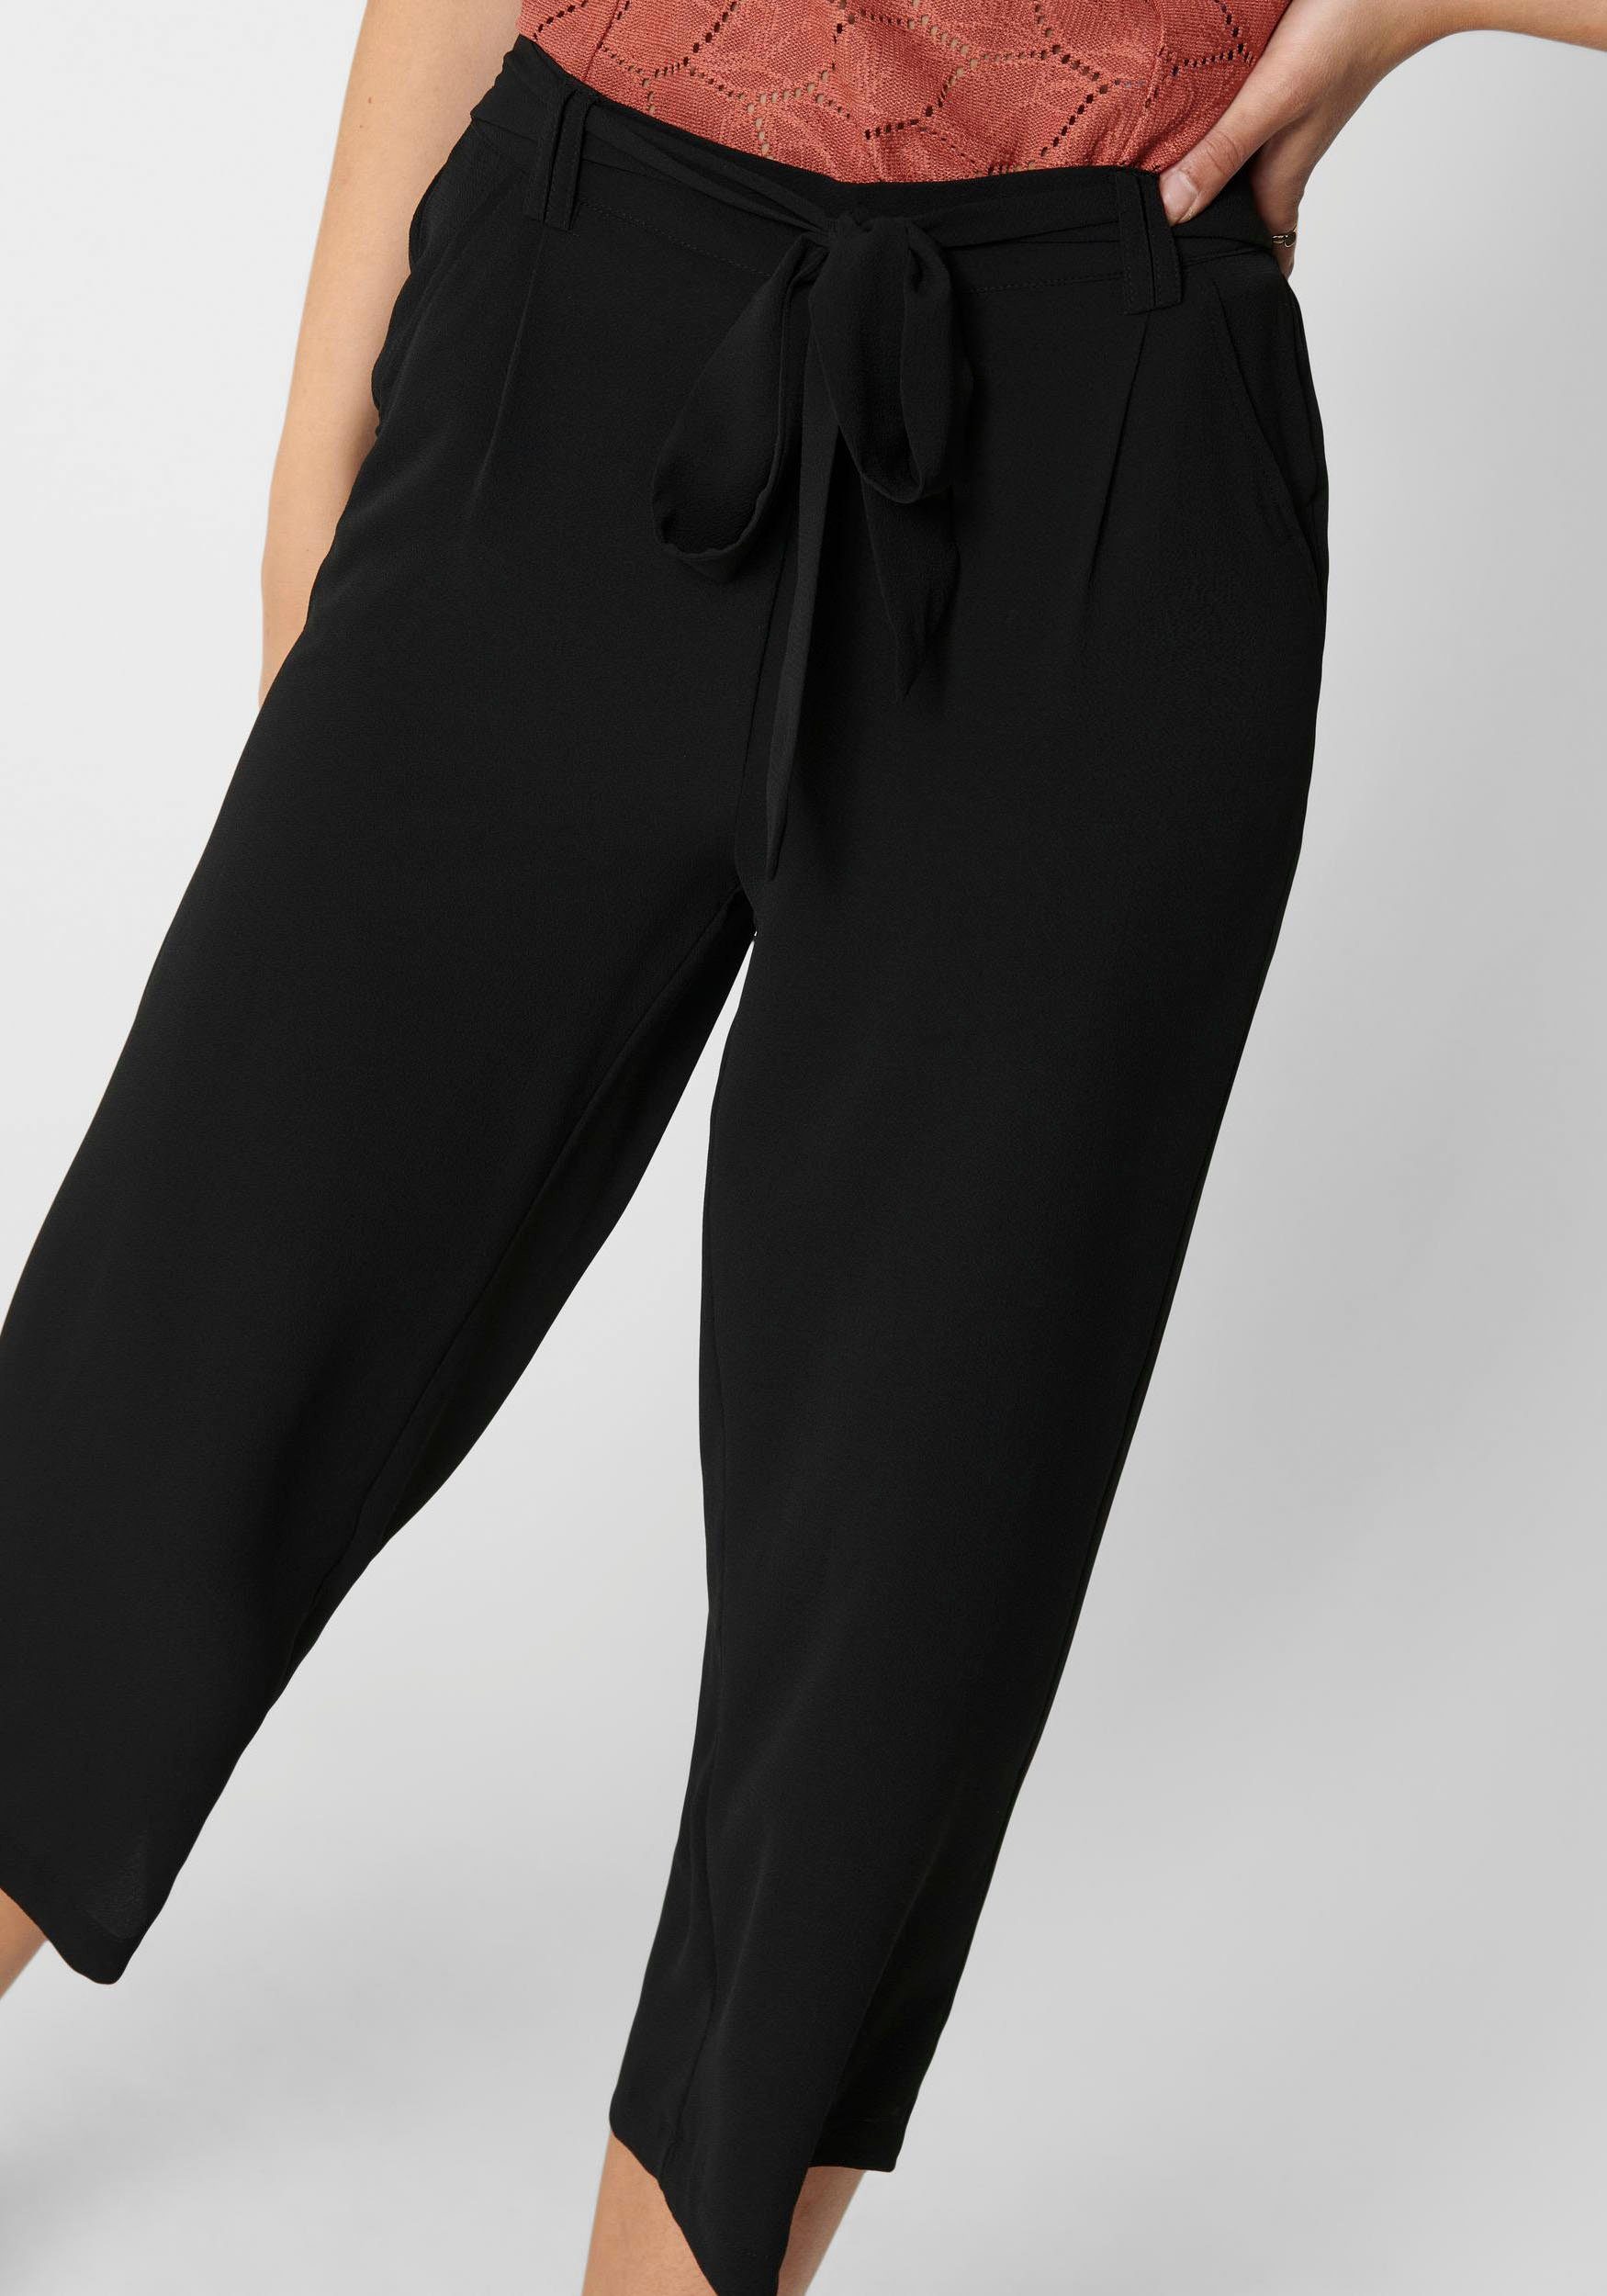 PALAZZO ONLWINNER gestreiftem ONLY CULOTTE Black uni in NOOS Design Palazzohose oder PTM PANT